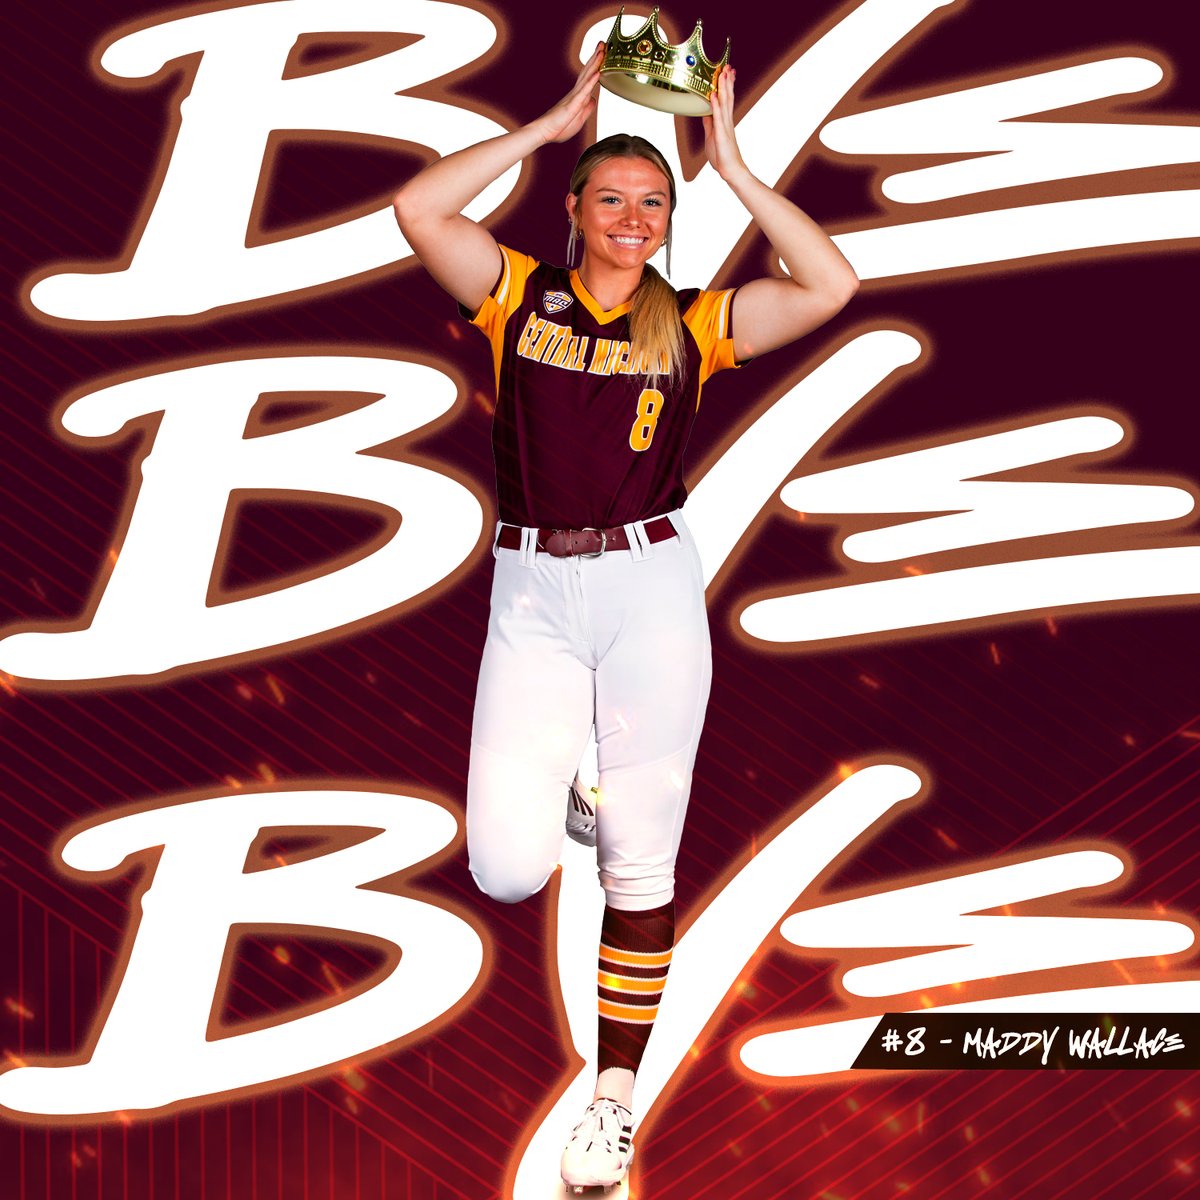 M4| Wally & the defense sit the Hornets down in order 1⃣2⃣3⃣ To the dish are the 2, 3 & 4 hitters #FireUpChips🔥⬆️🥎 | @maddywallace7